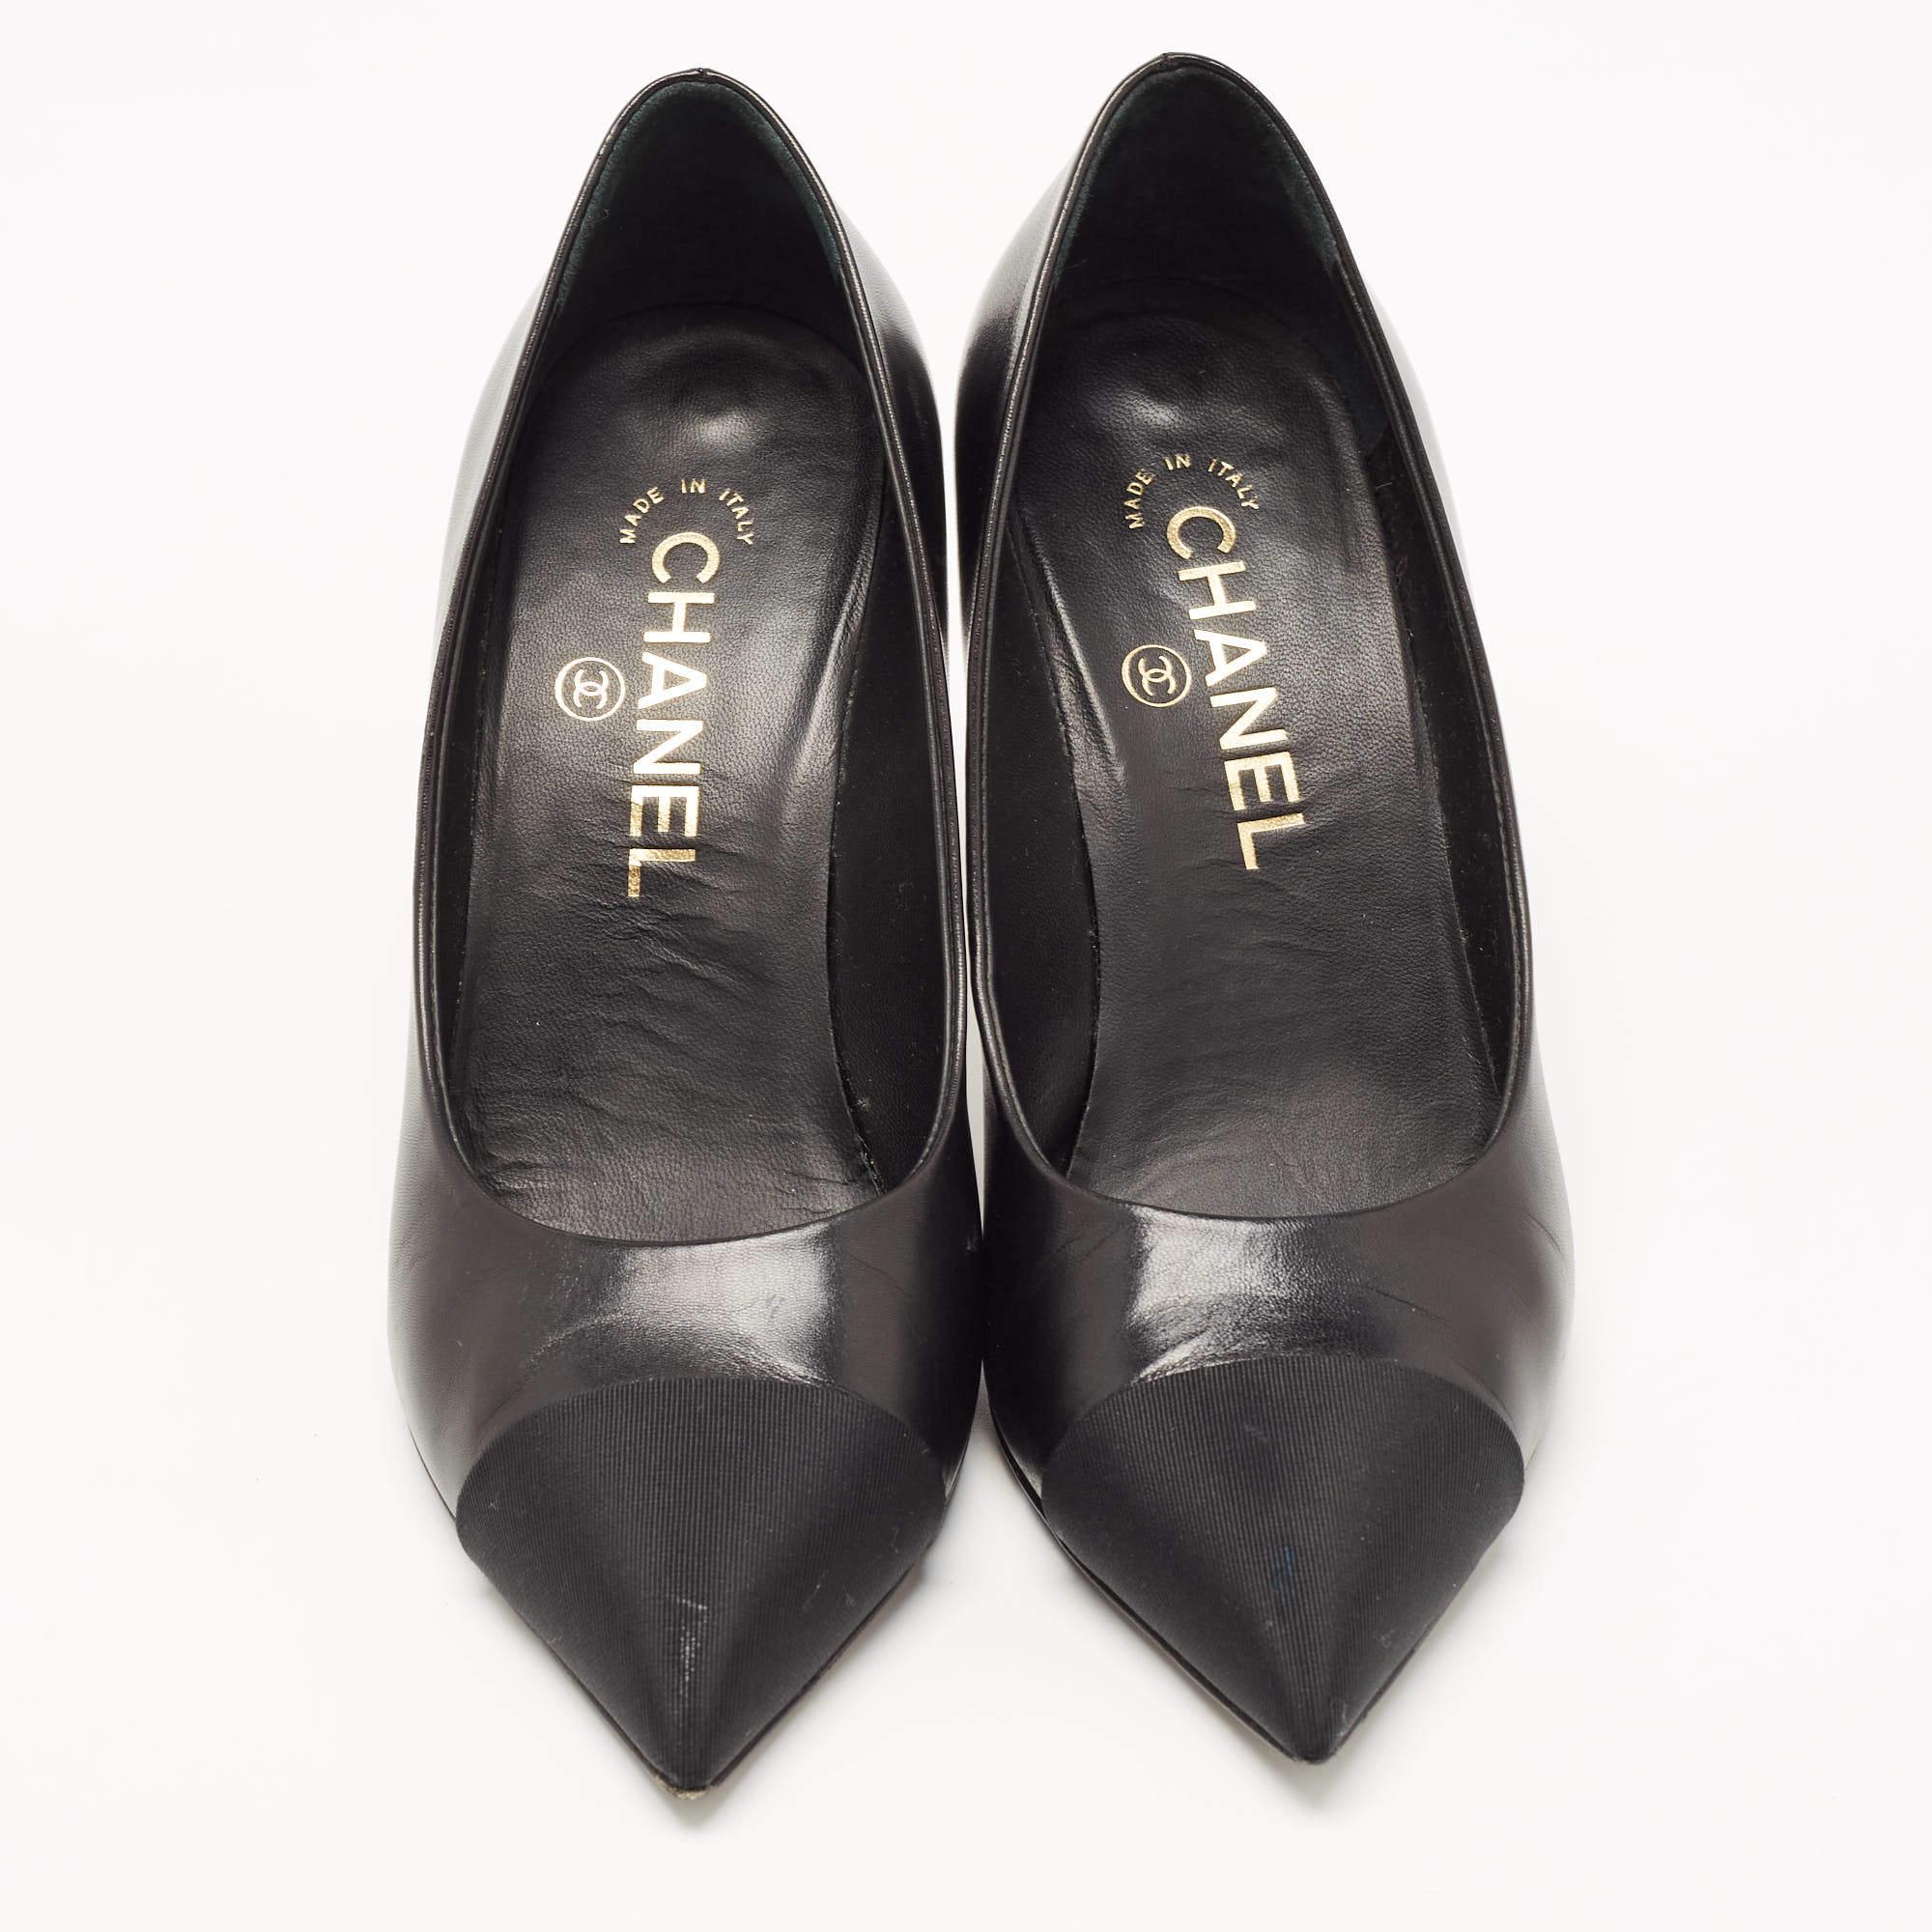 Perfectly sewn and finished to ensure an elegant look and fit, these Chanel shoes are a purchase you'll love flaunting. They look great on the feet.

